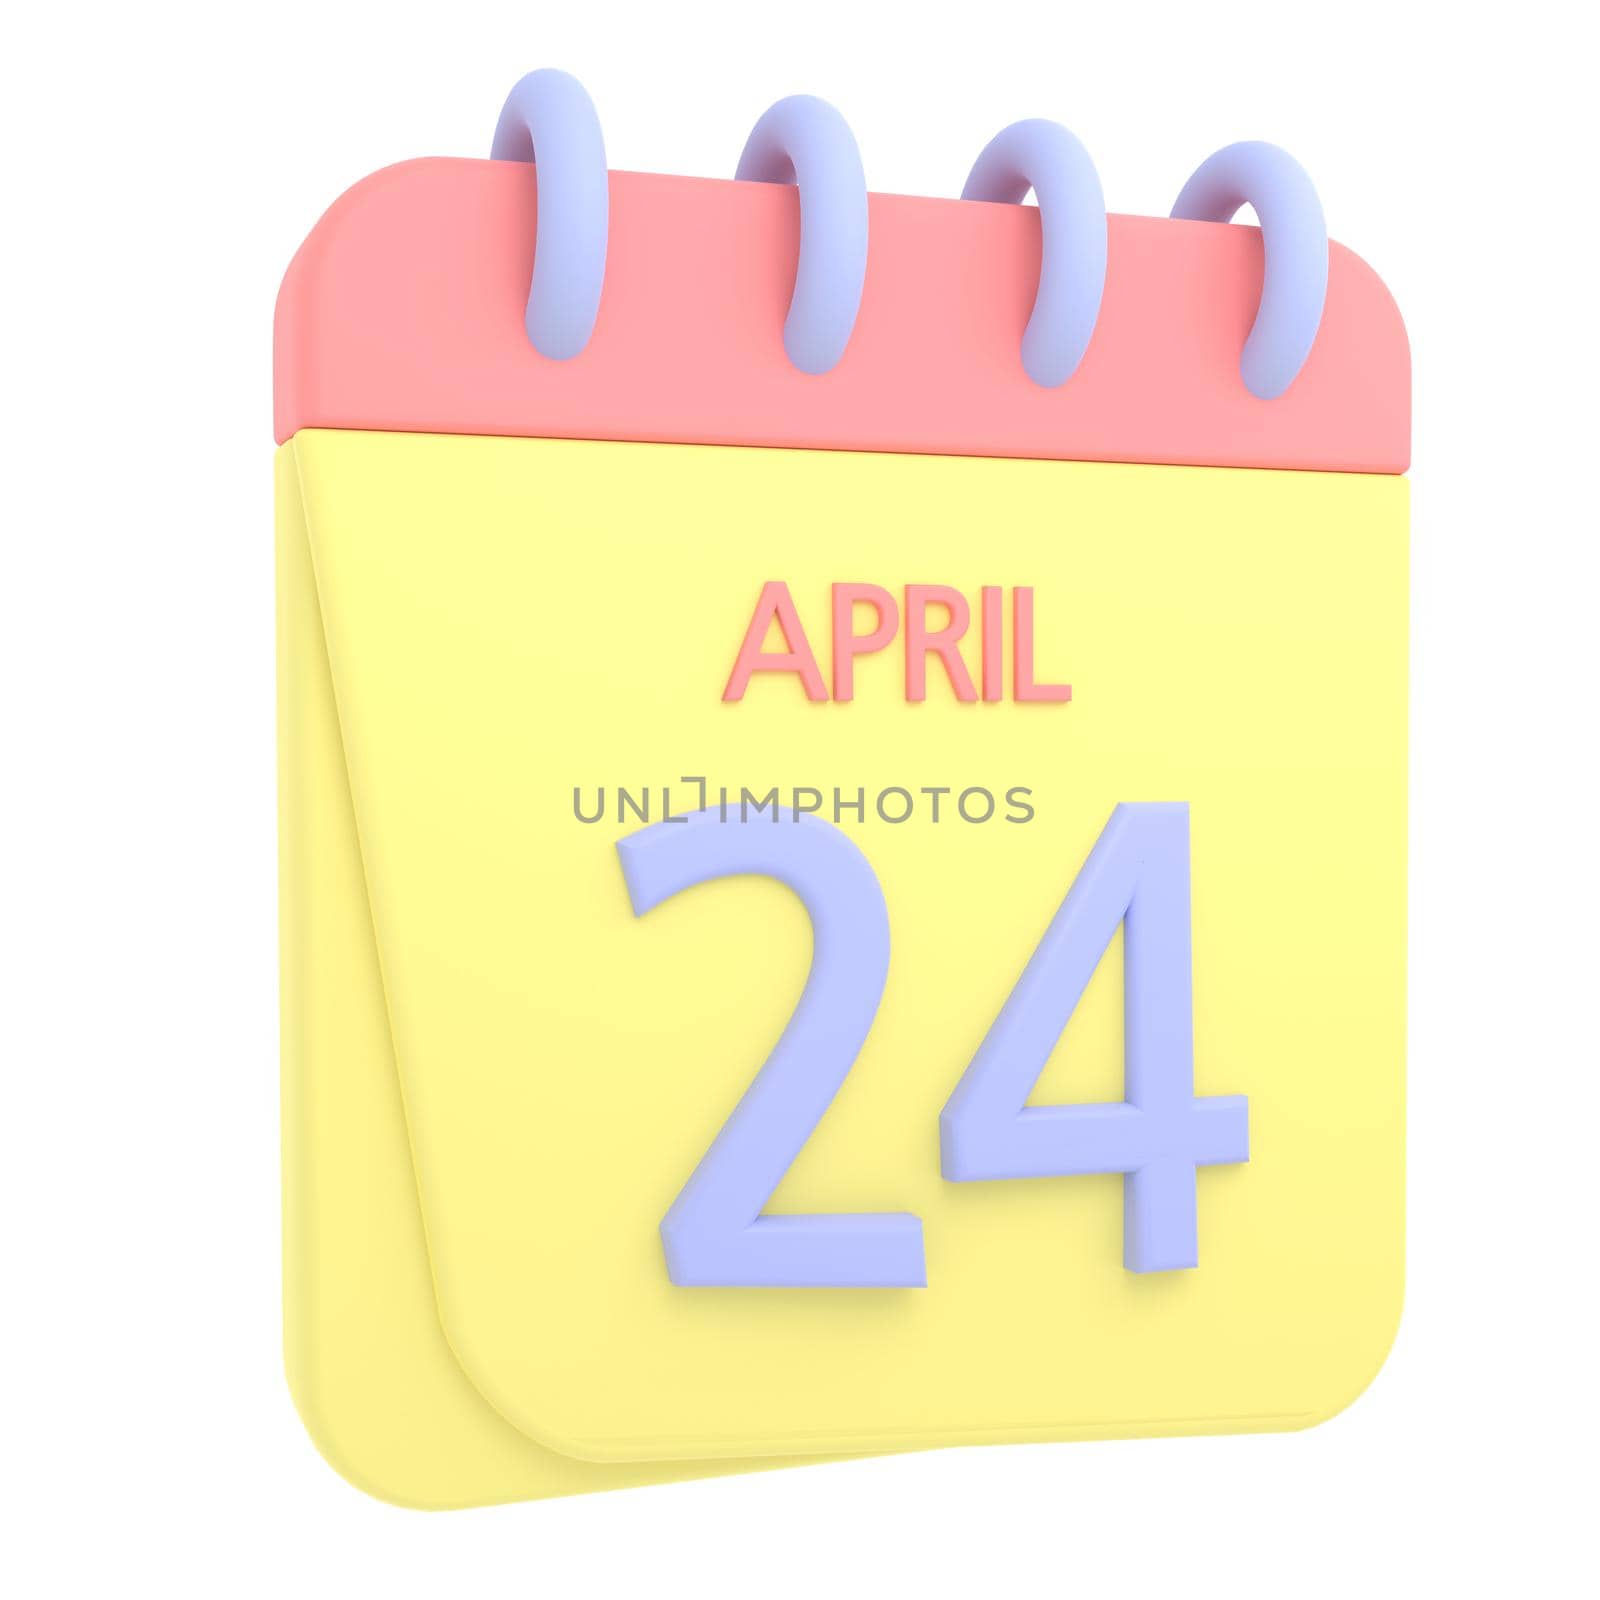 24th April 3D calendar icon. Web style. High resolution image. White background